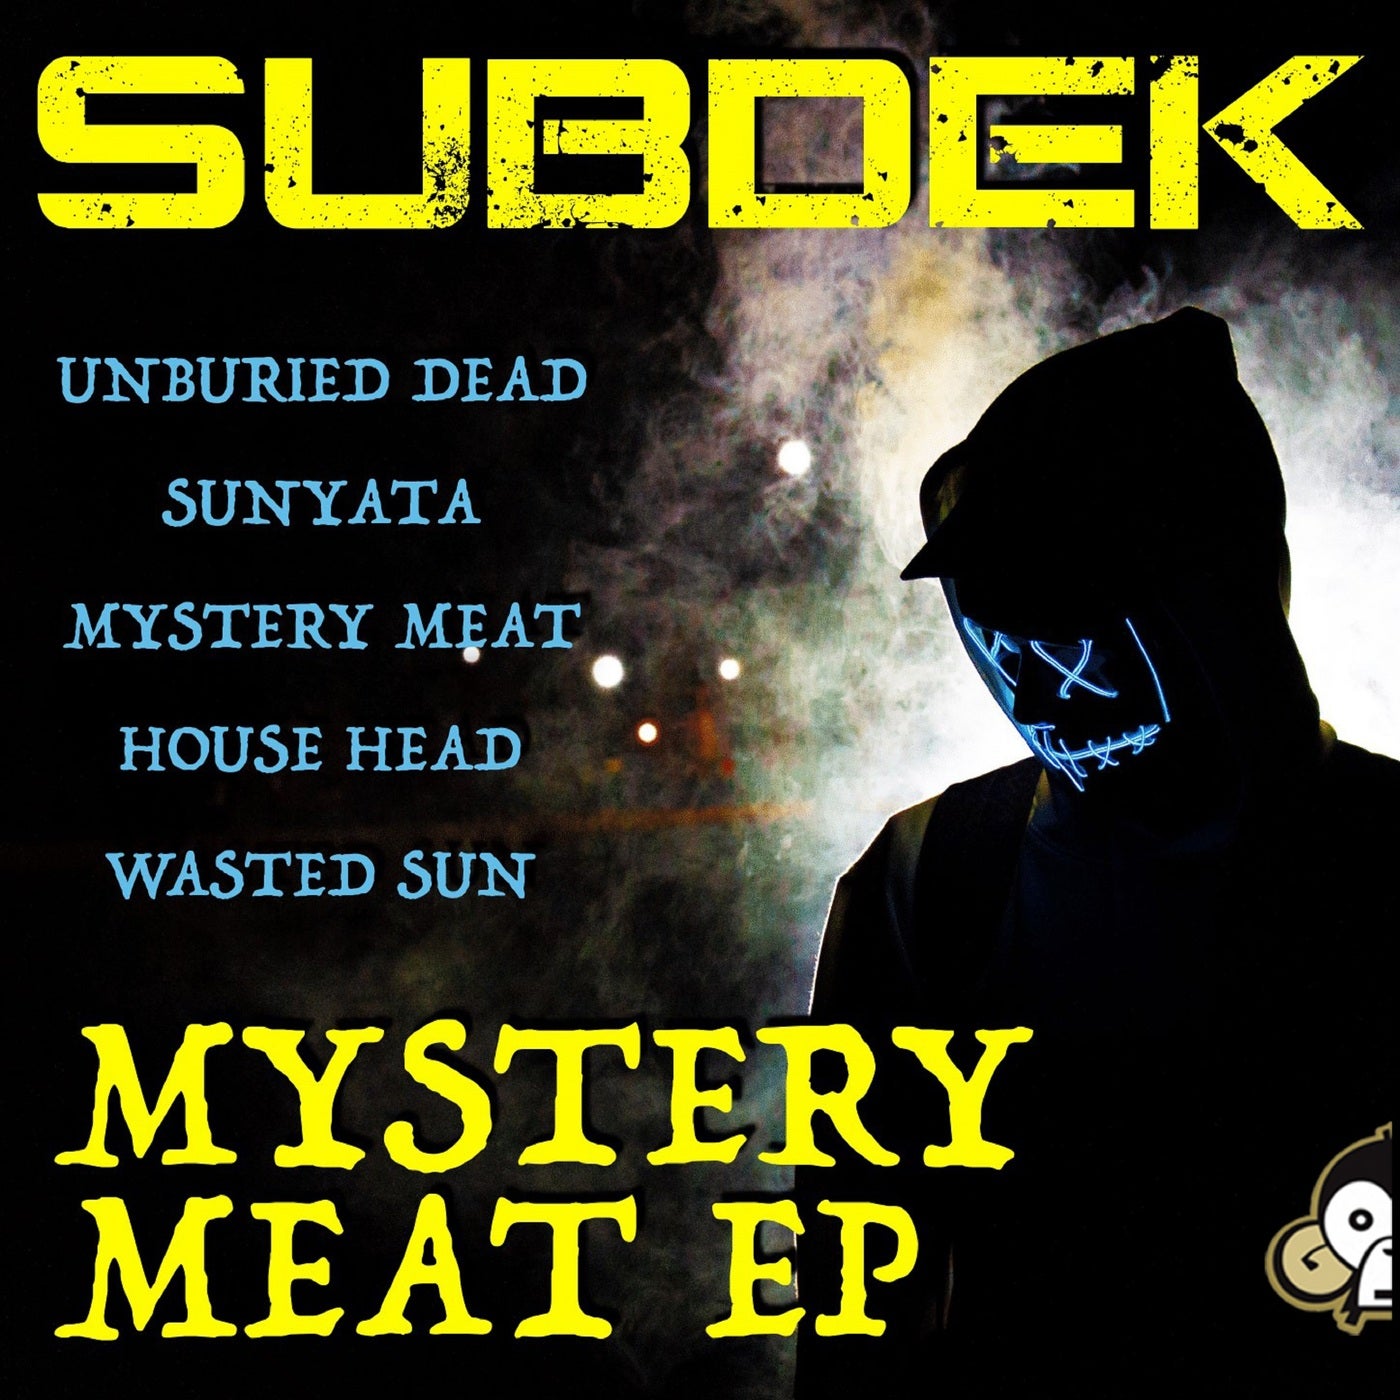 Mystery Meat EP